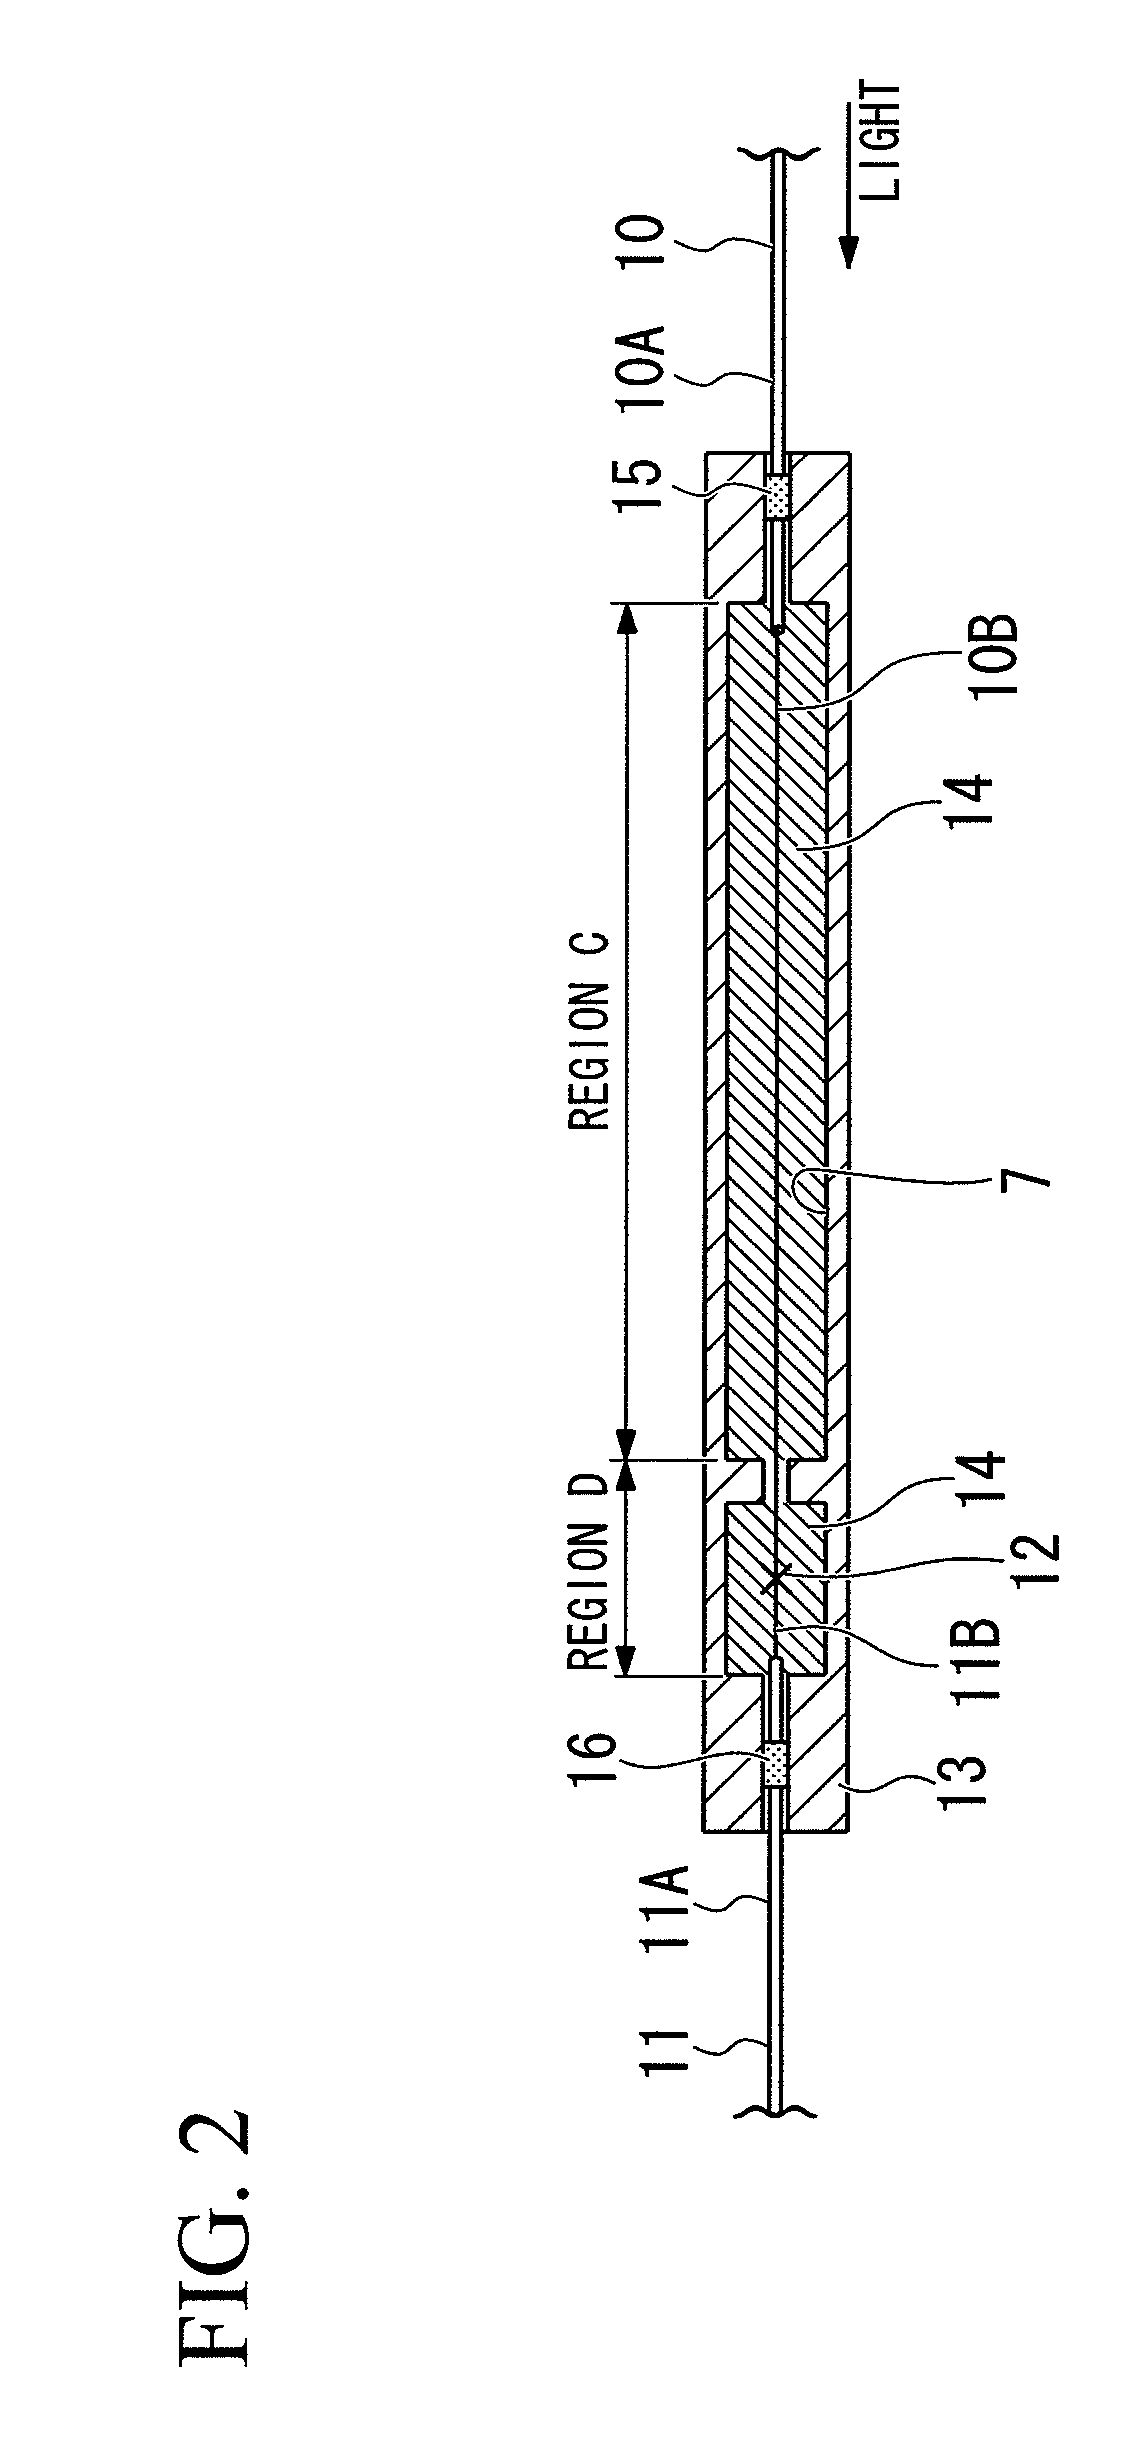 Fusion splicing structure of optical fibers